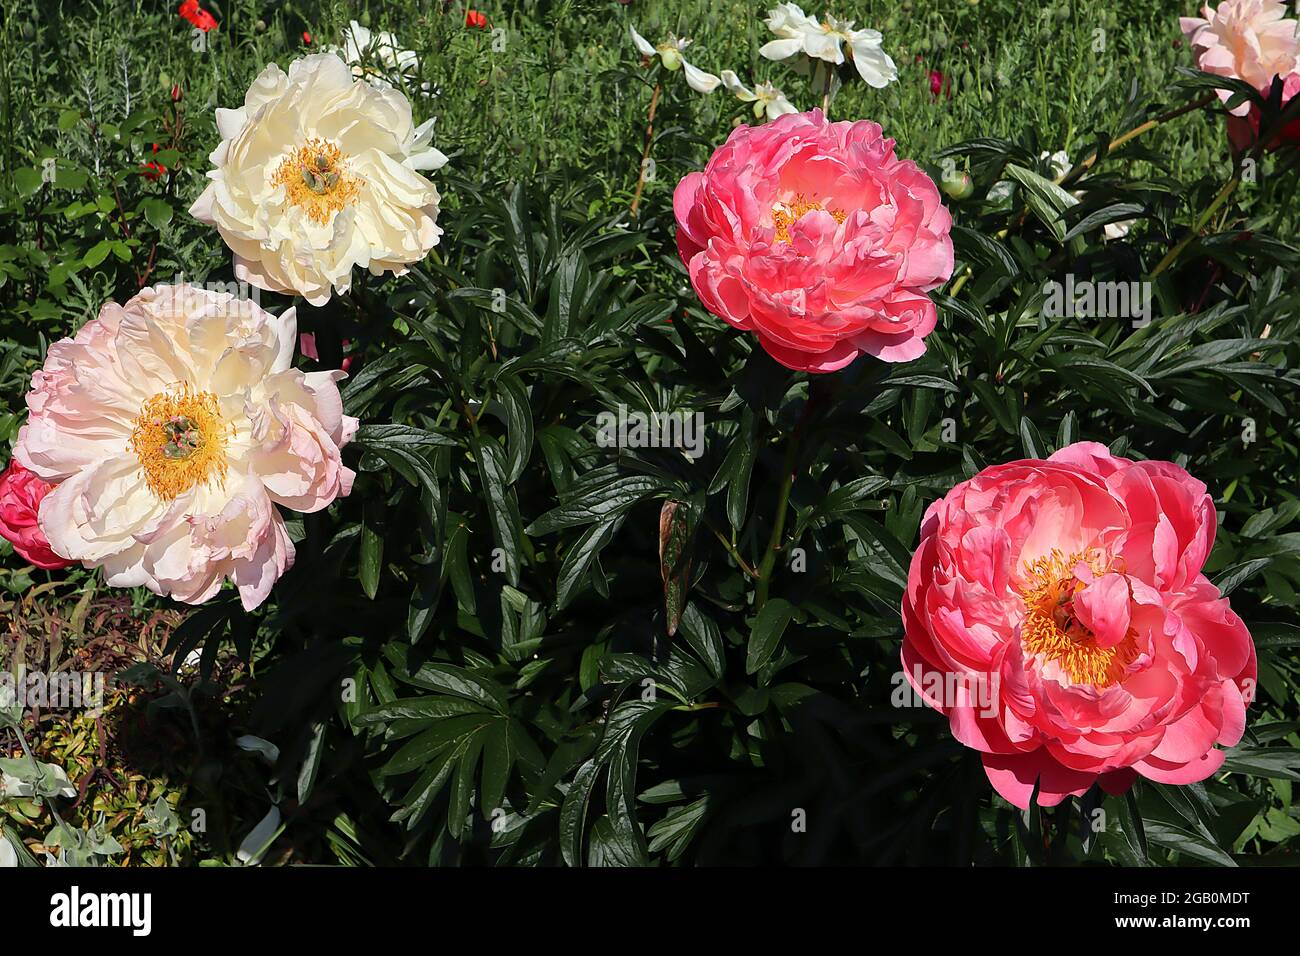 Paeonia ‘Coral Sunset’ Peony Coral Sunset – coral pink flowers with multiple layers of petals,  June, England, UK Stock Photo